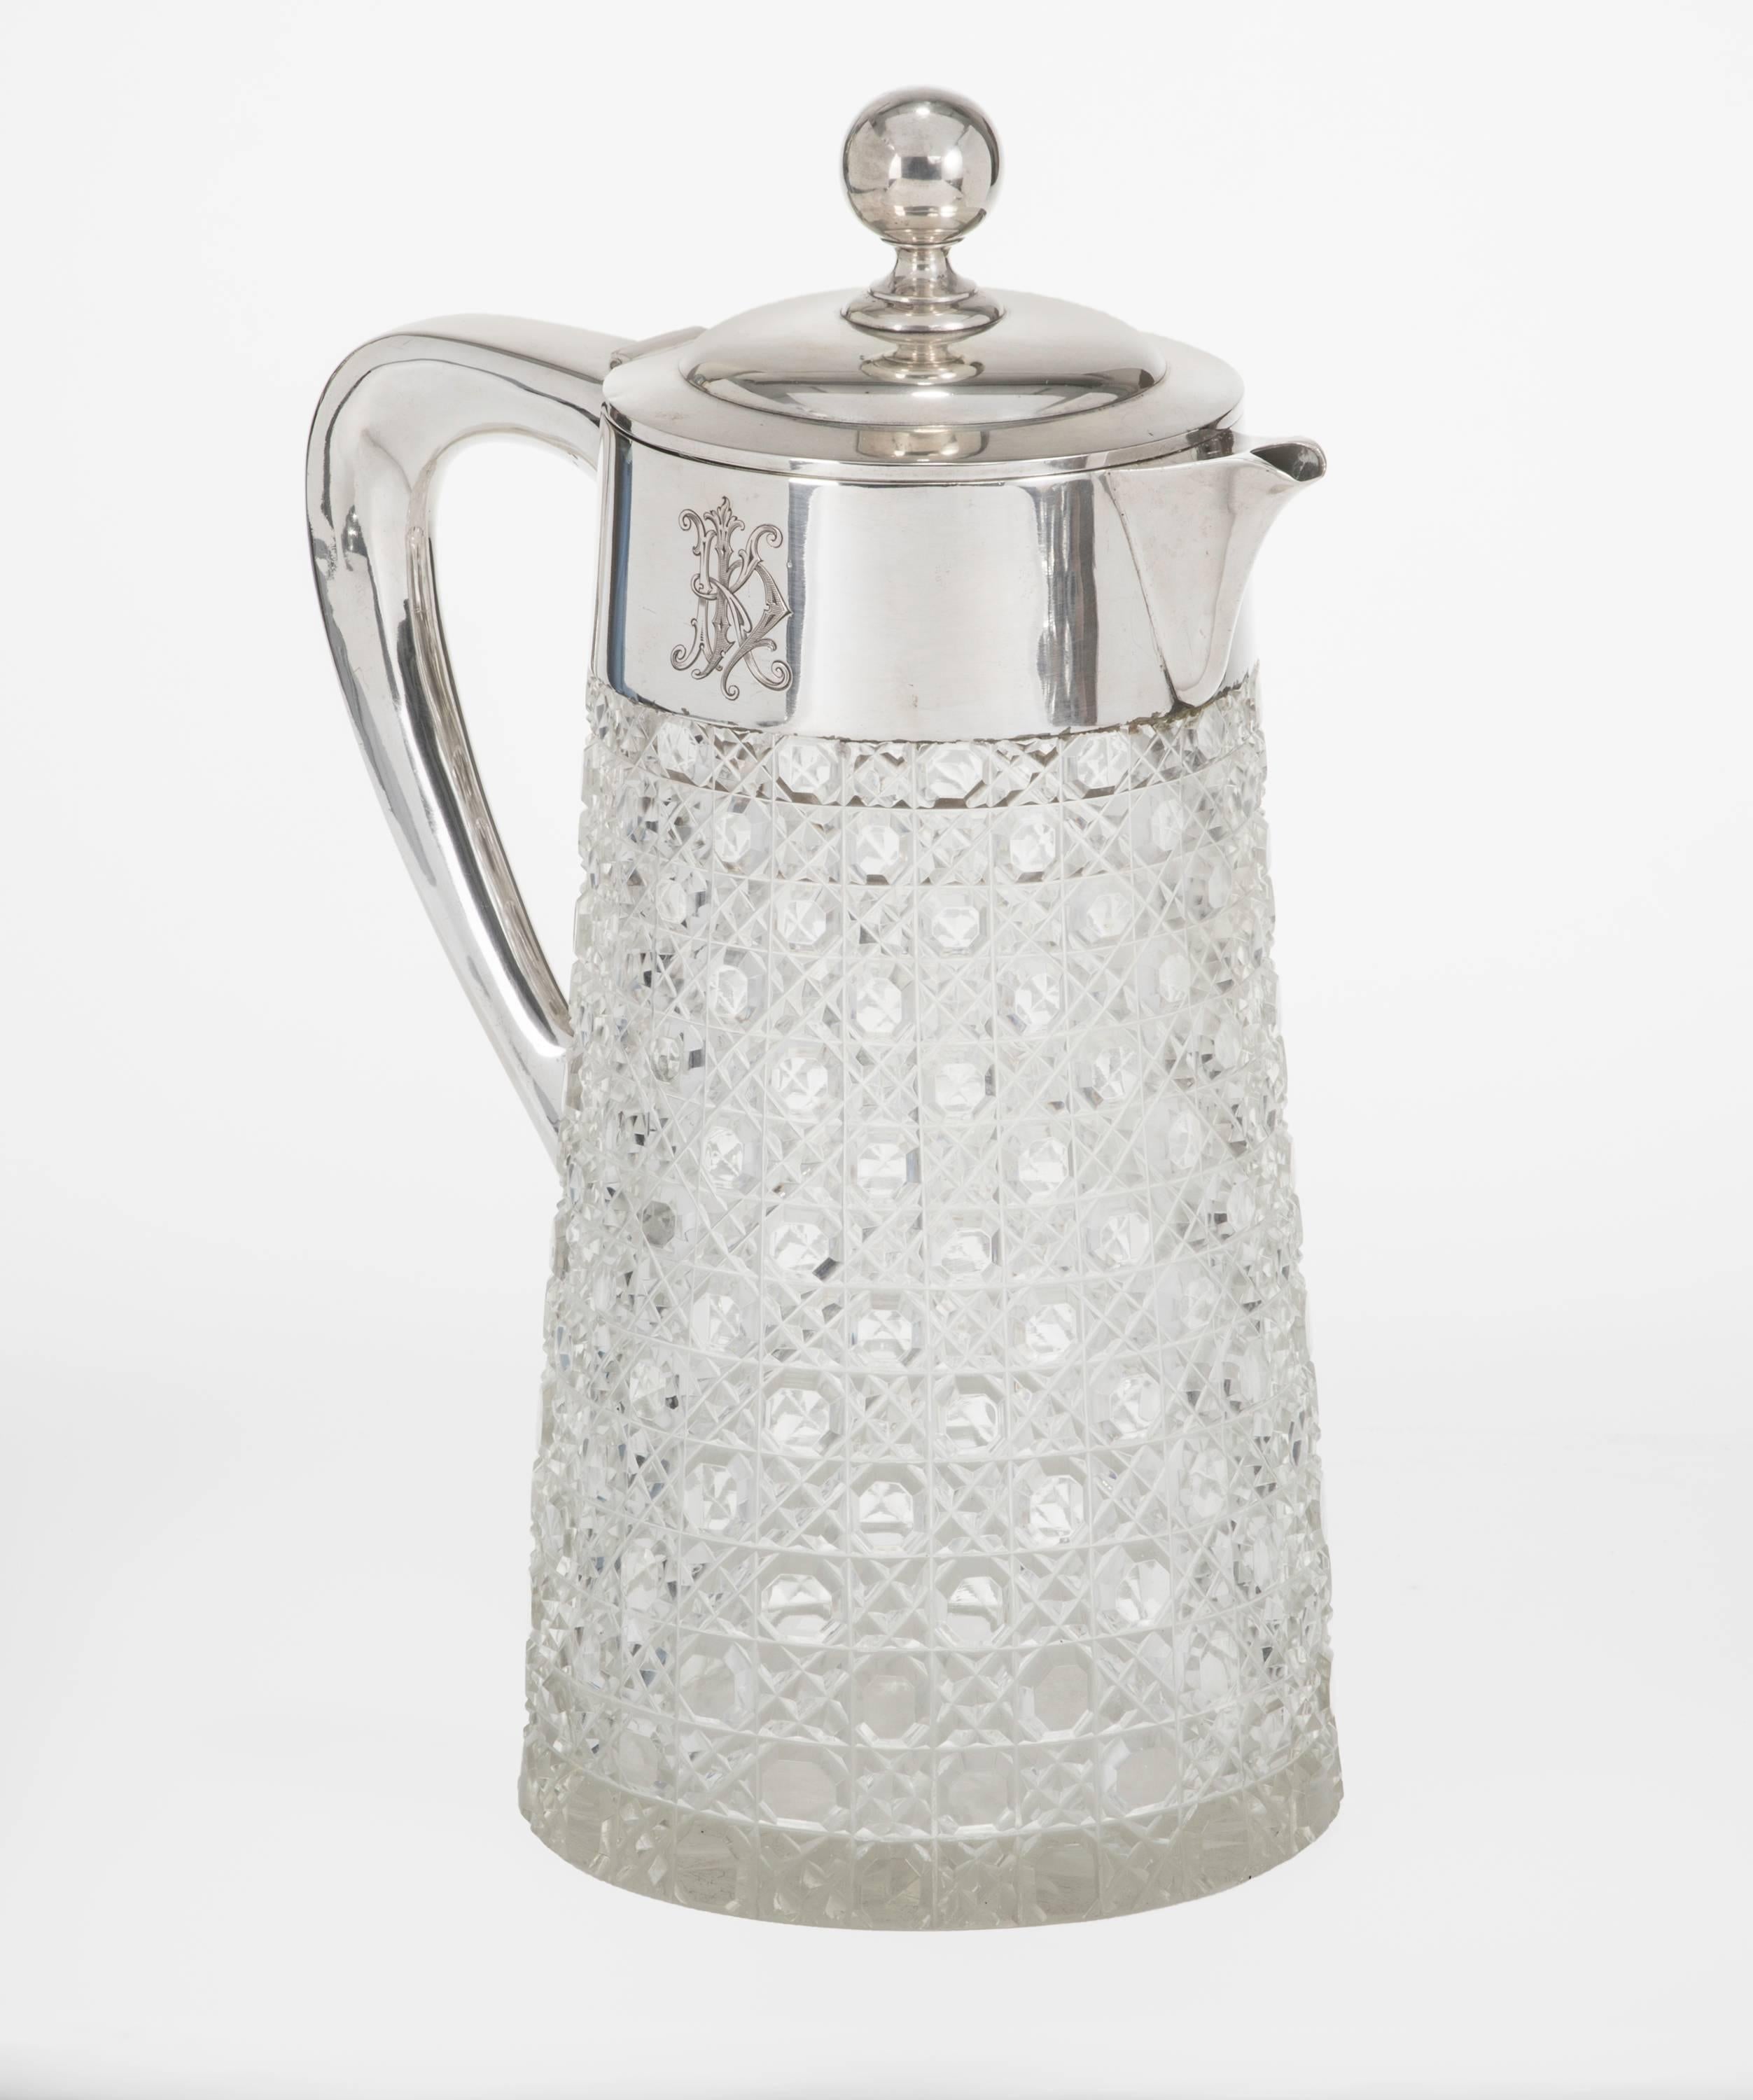 Claret Jug Pitcher, 800 German Sterling Silver And Crystal In Good Condition For Sale In Summerland, CA